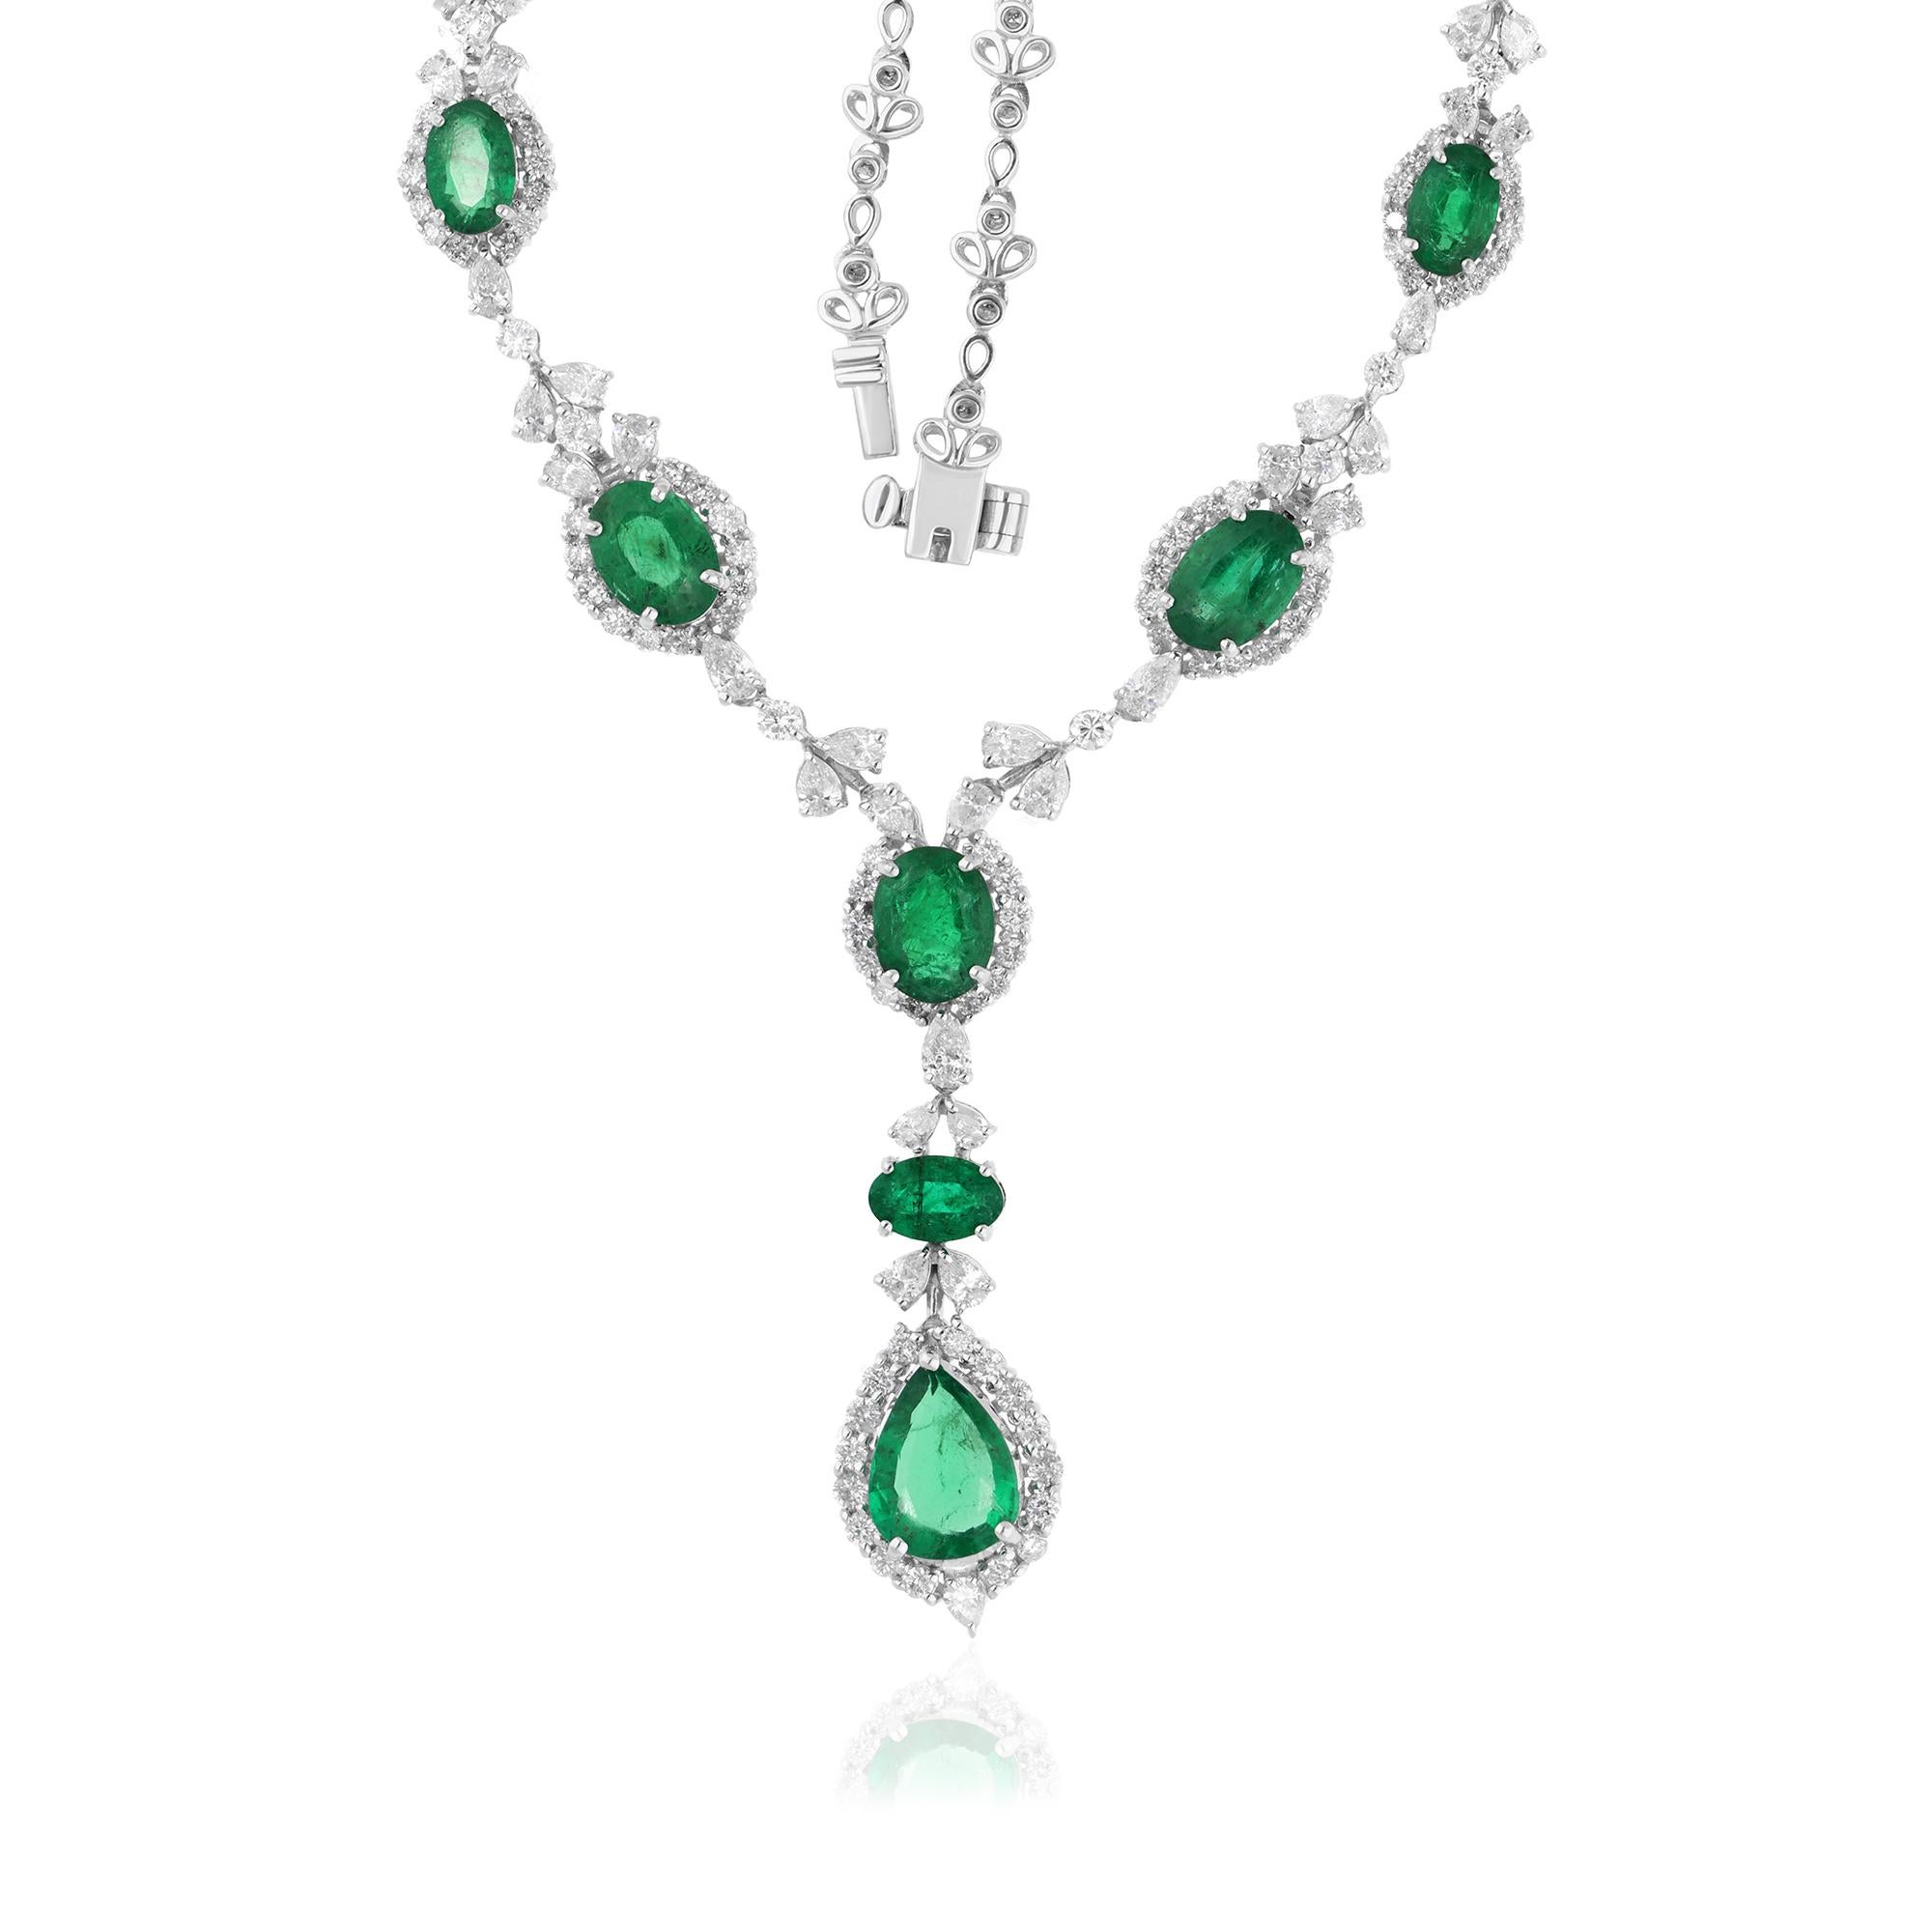 Elevate your style with the enchanting beauty of this Oval & Pear Shape Emerald Gemstone Necklace, adorned with sparkling diamonds and meticulously crafted in 14 karat white gold. Every aspect of this necklace exudes sophistication and refinement,